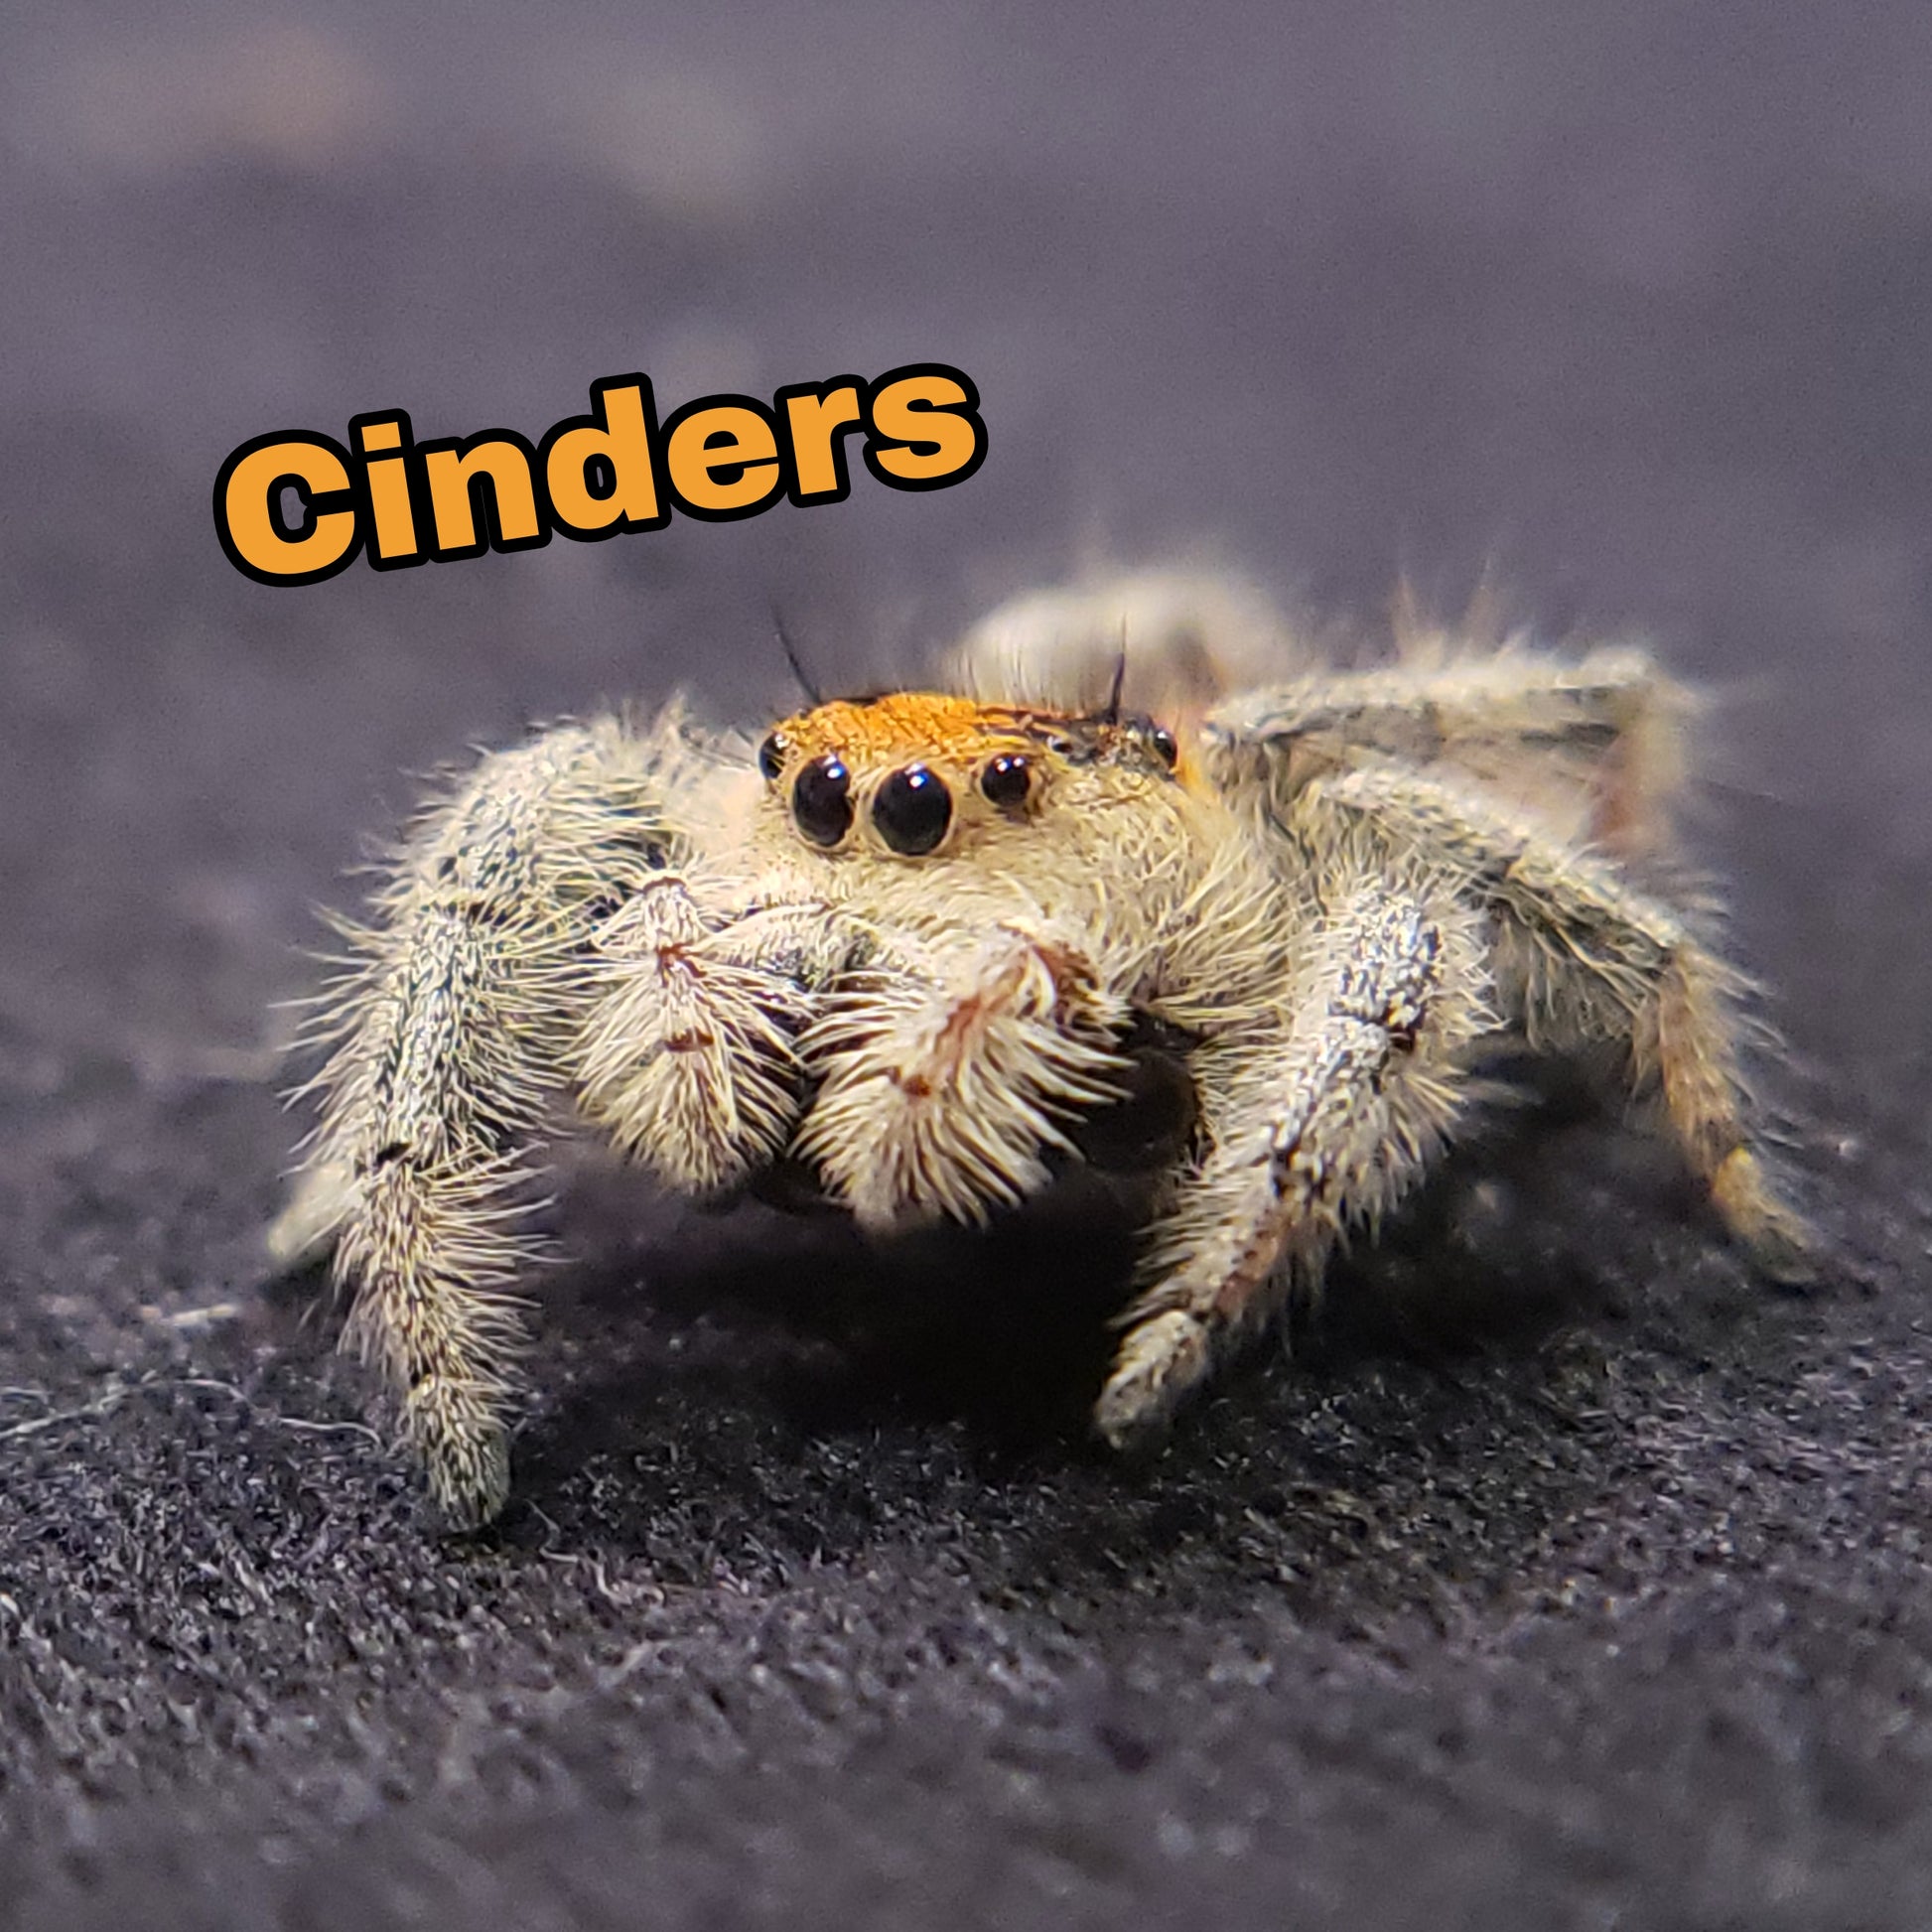 Regal Jumping Spider "Cinders" - Jumping Spiders For Sale - Spiders Source - #1 Regal Jumping Spider Store